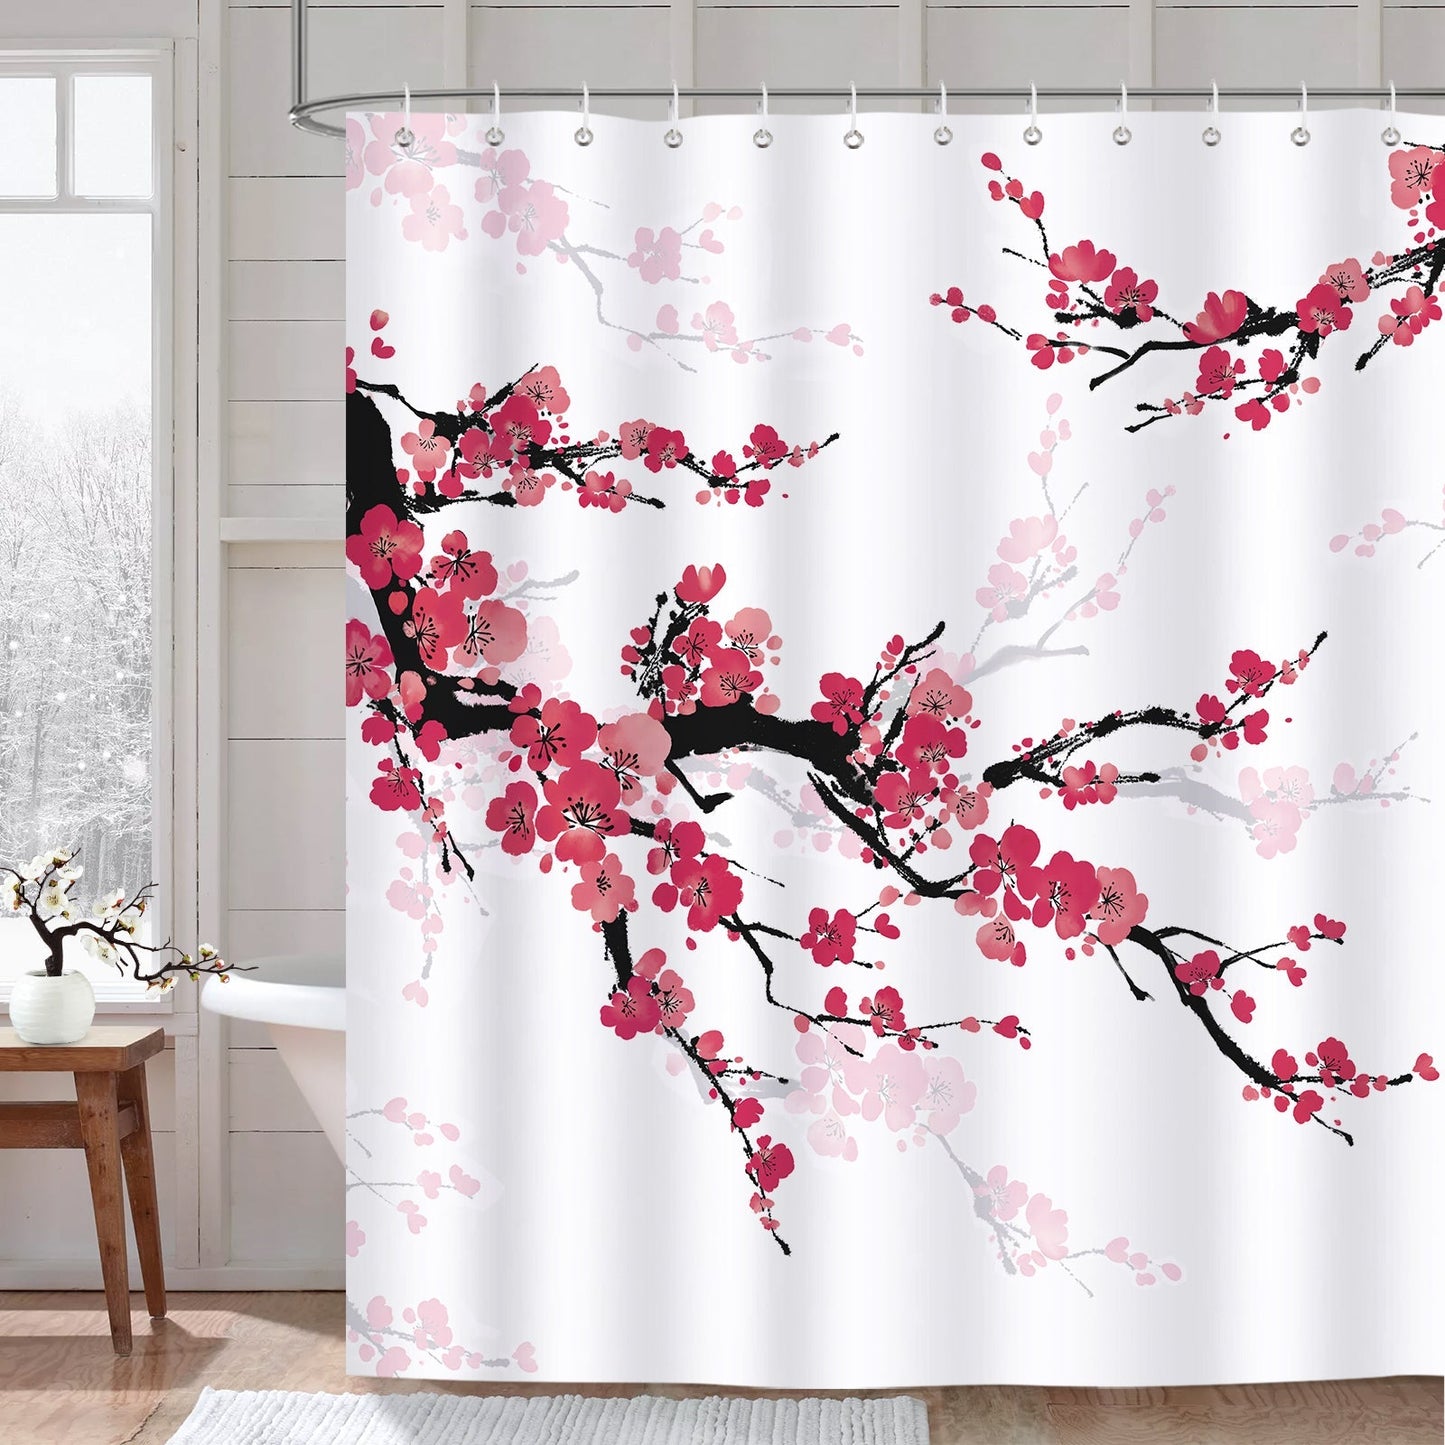 Cherry Blossom Floral Shower Curtain